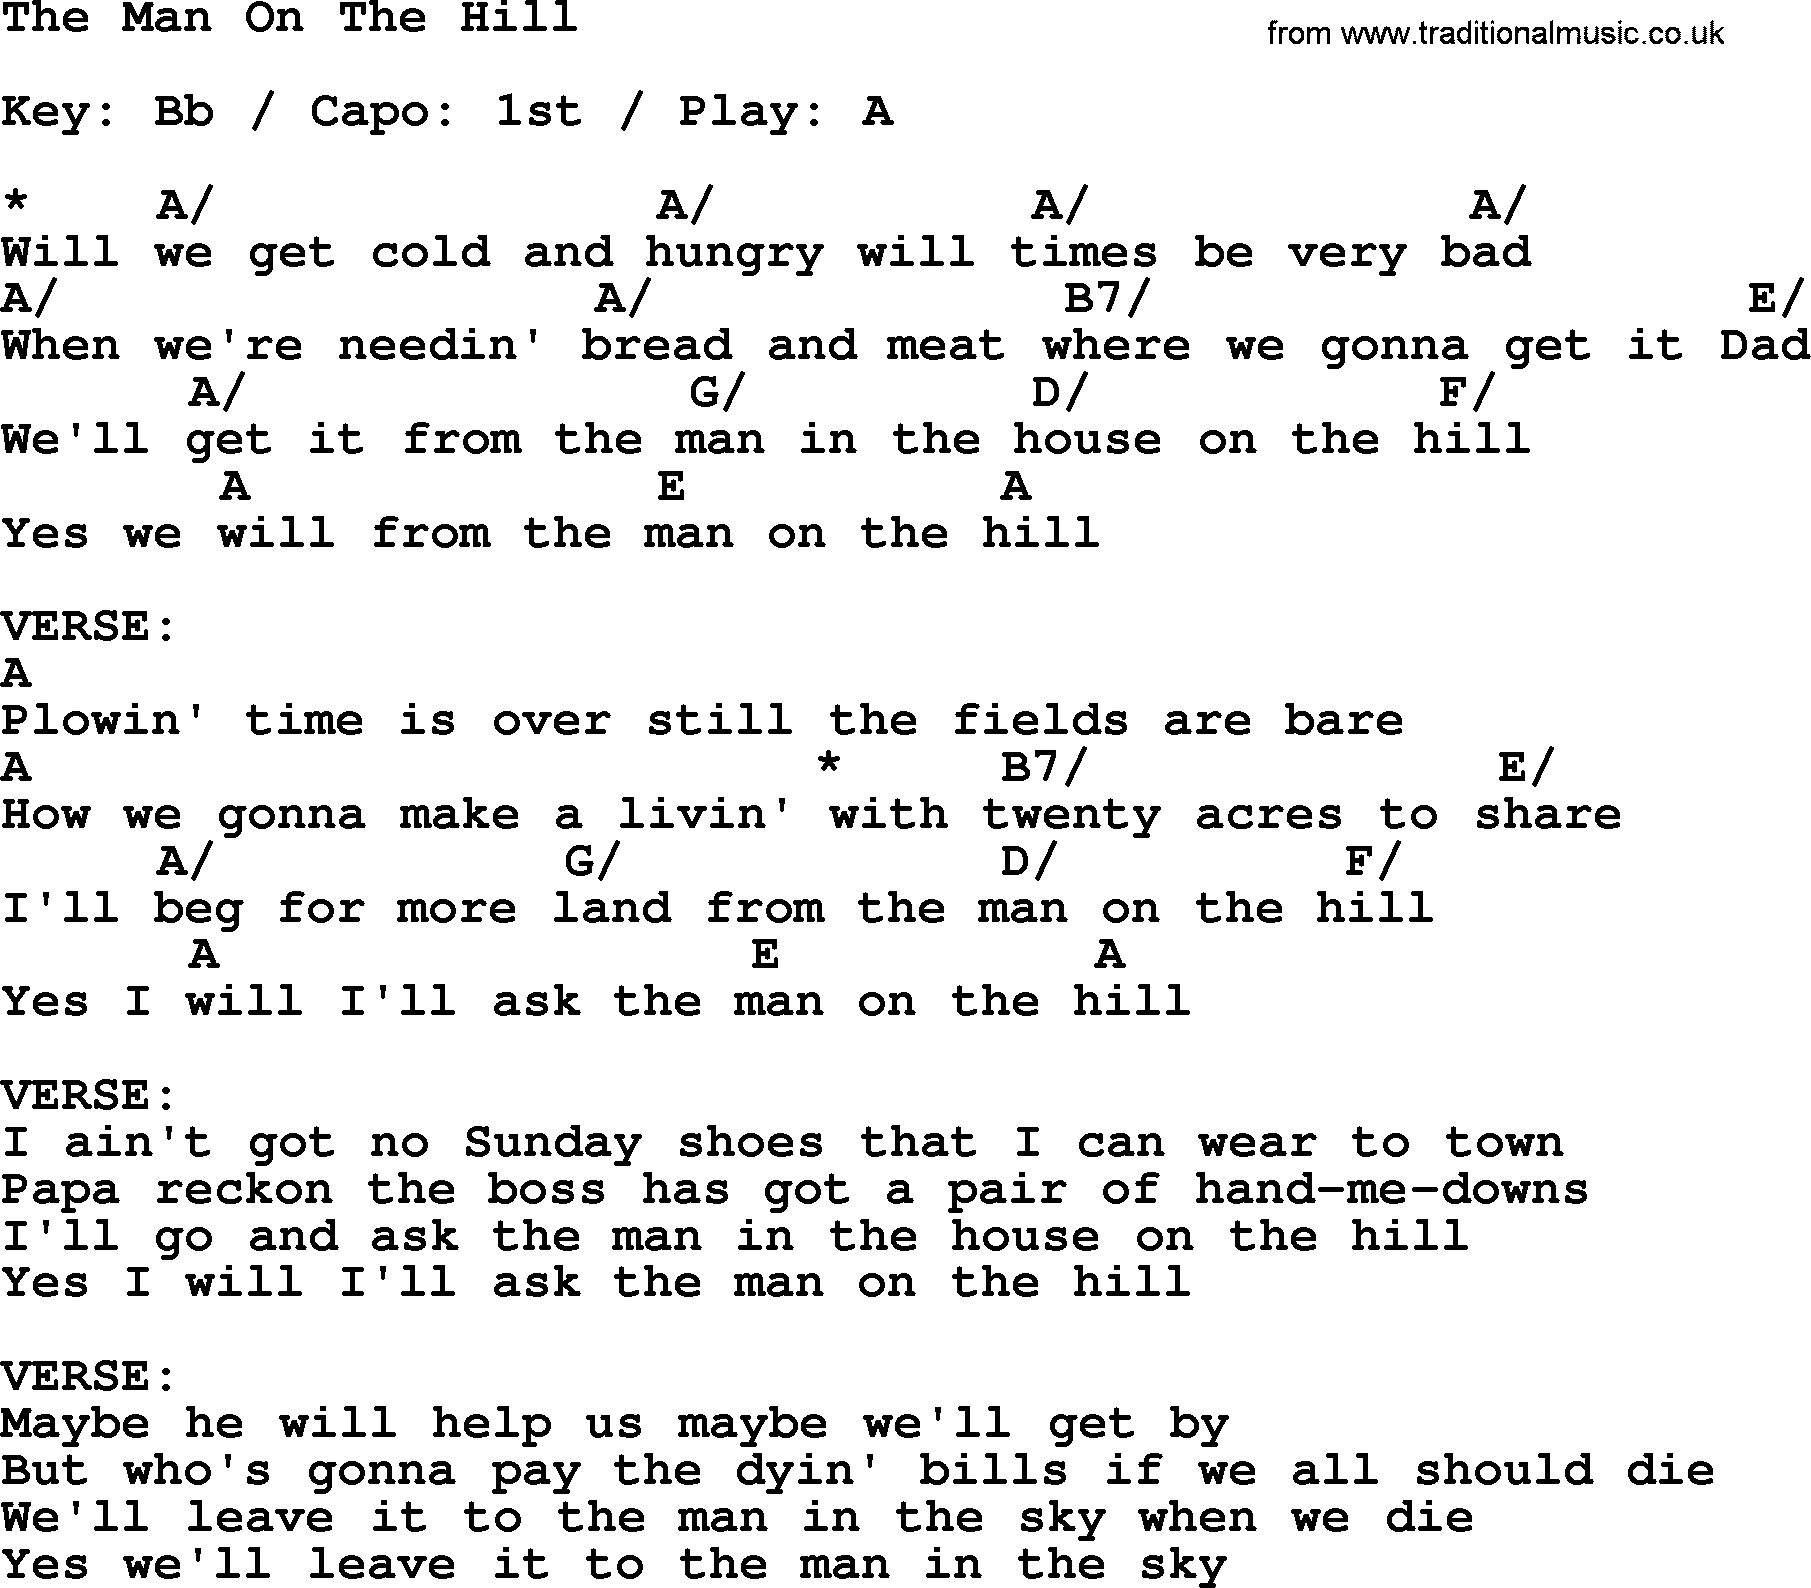 Johnny Cash song The Man On The Hill, lyrics and chords